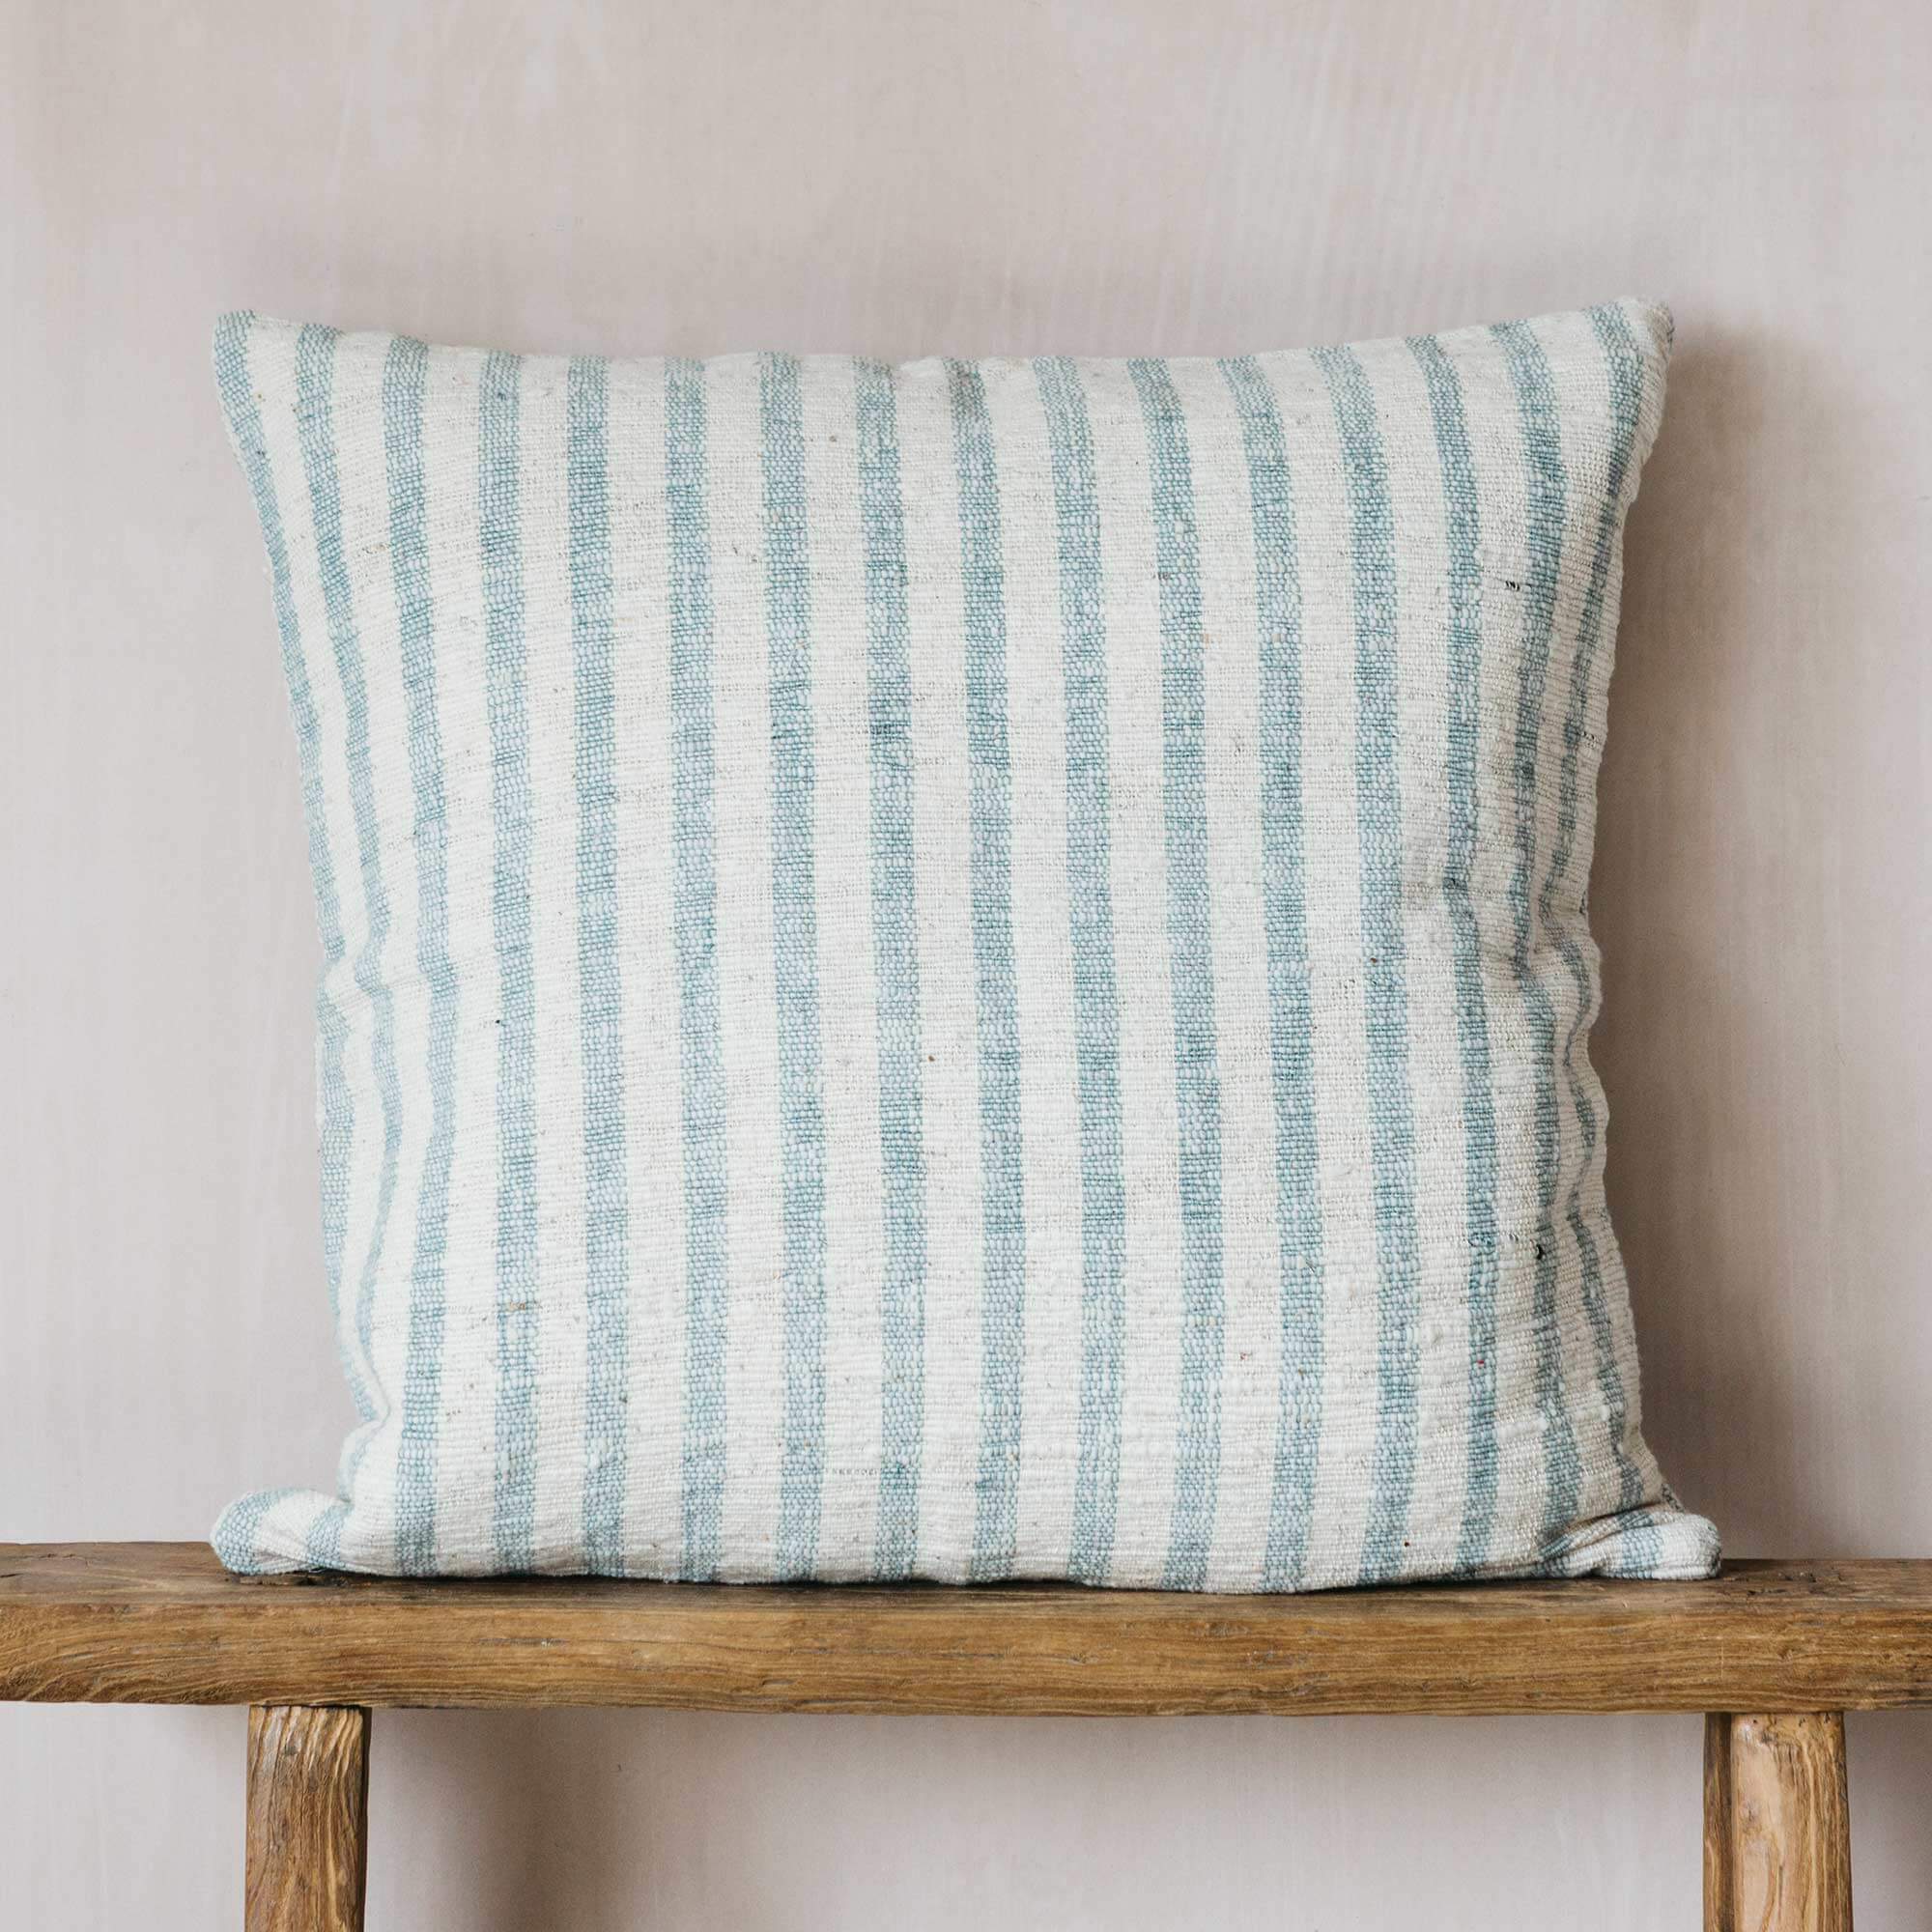 Read more about Graham and green large blue striped hand-loomed cushion